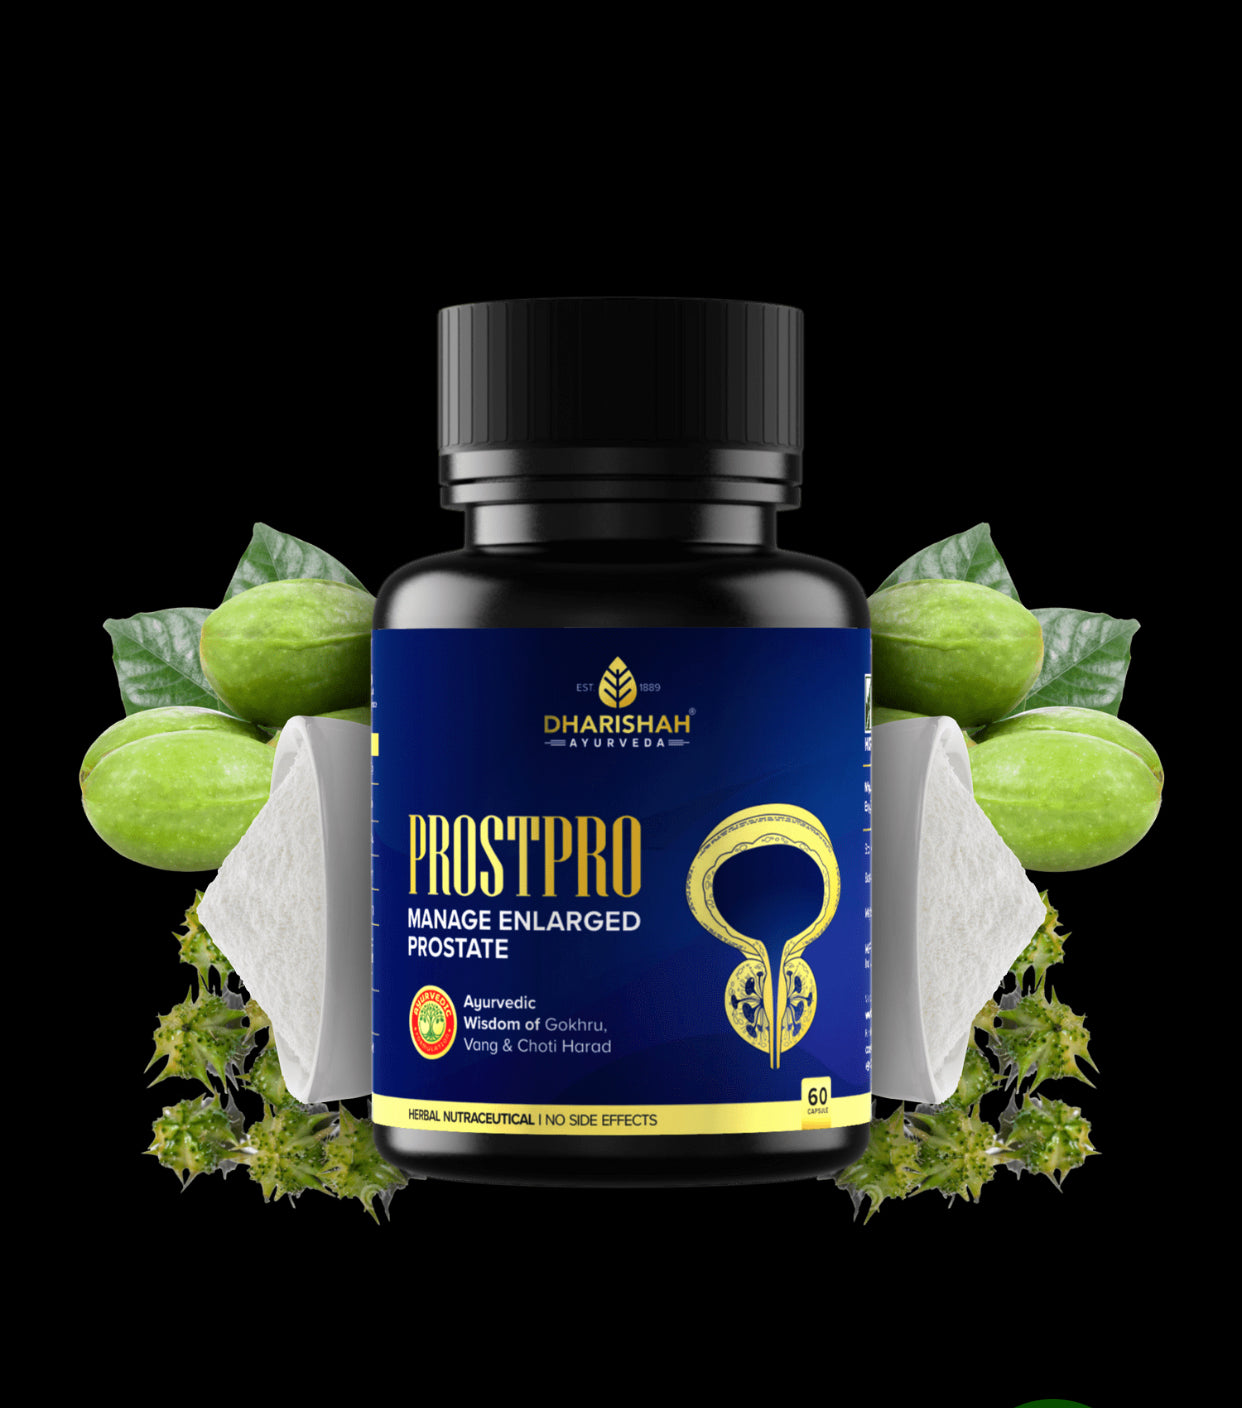 Prostpro - 60 Capsules - For enlarged prostate and difficulty in urination